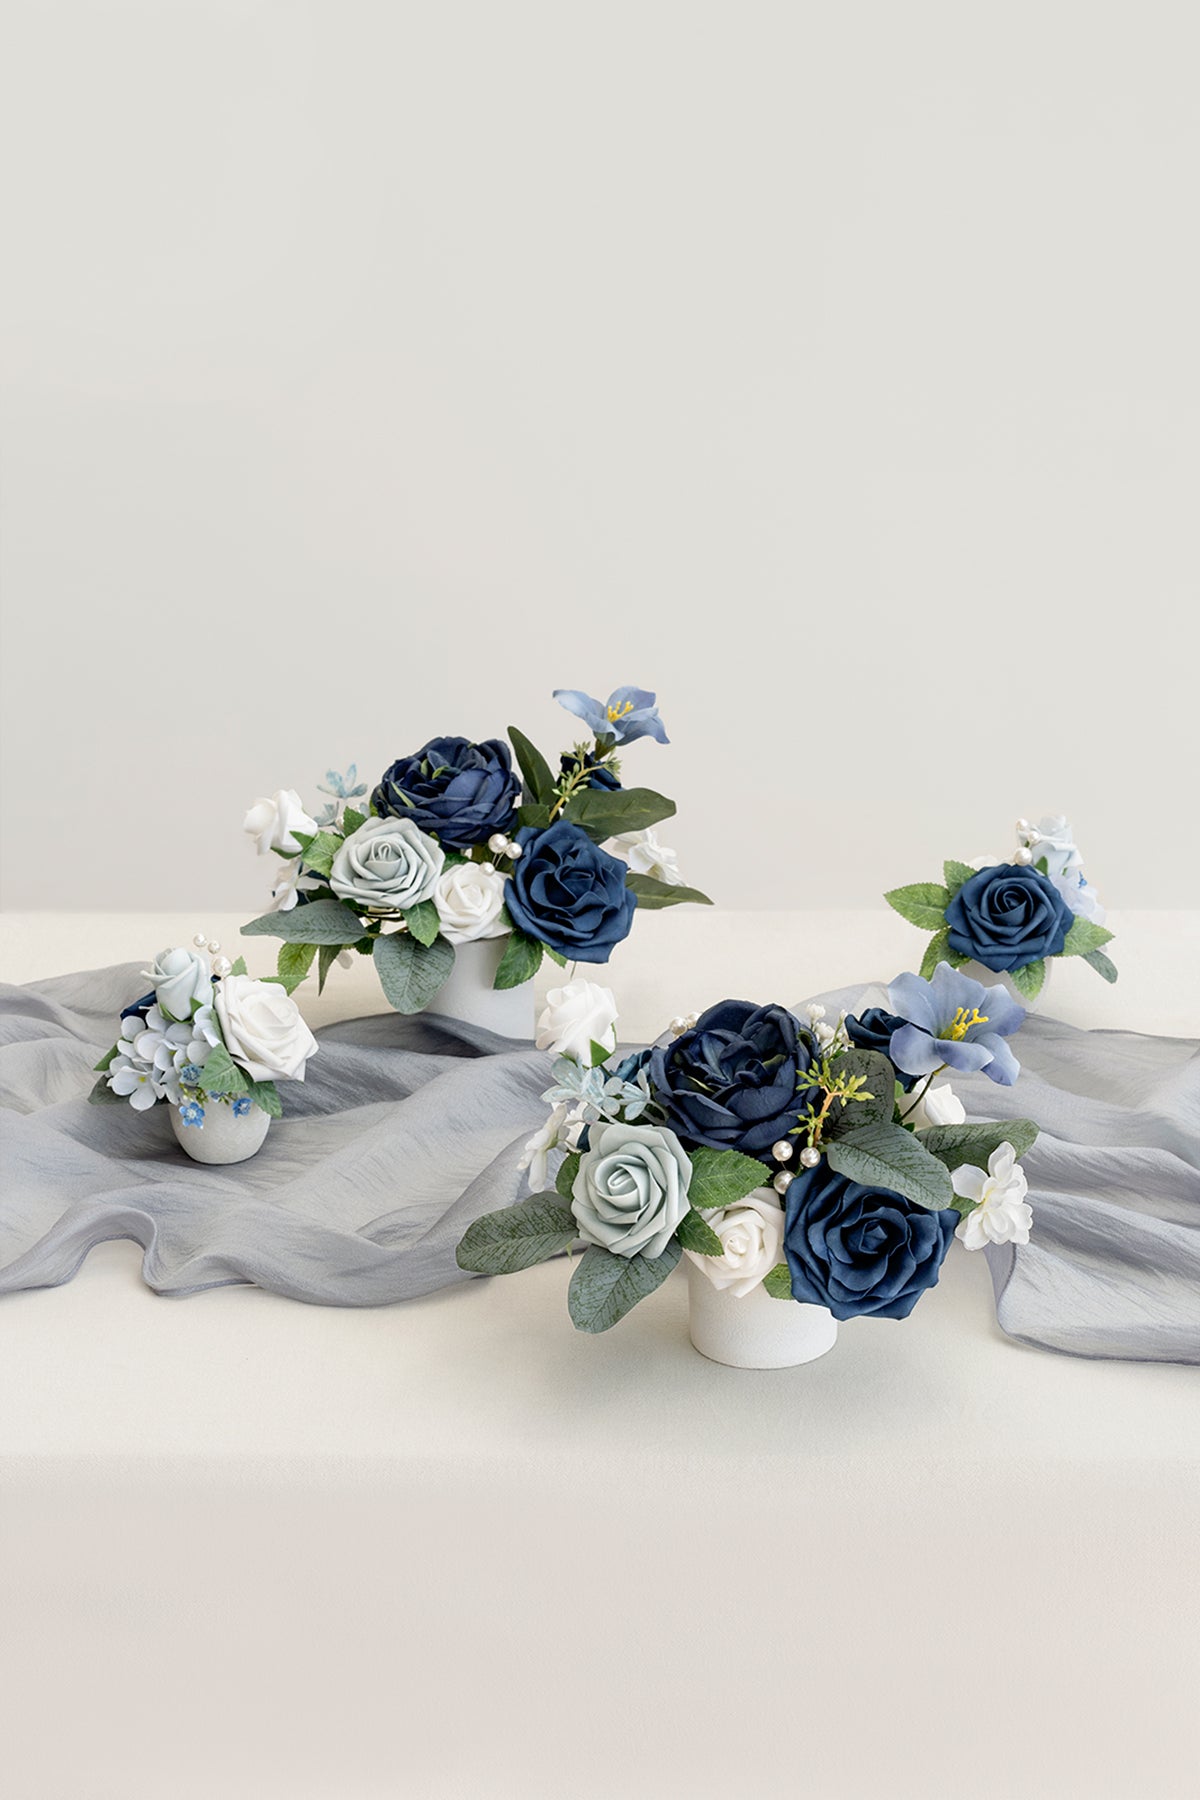 Assorted Floral Centerpiece Set in Dusty Blue & Navy